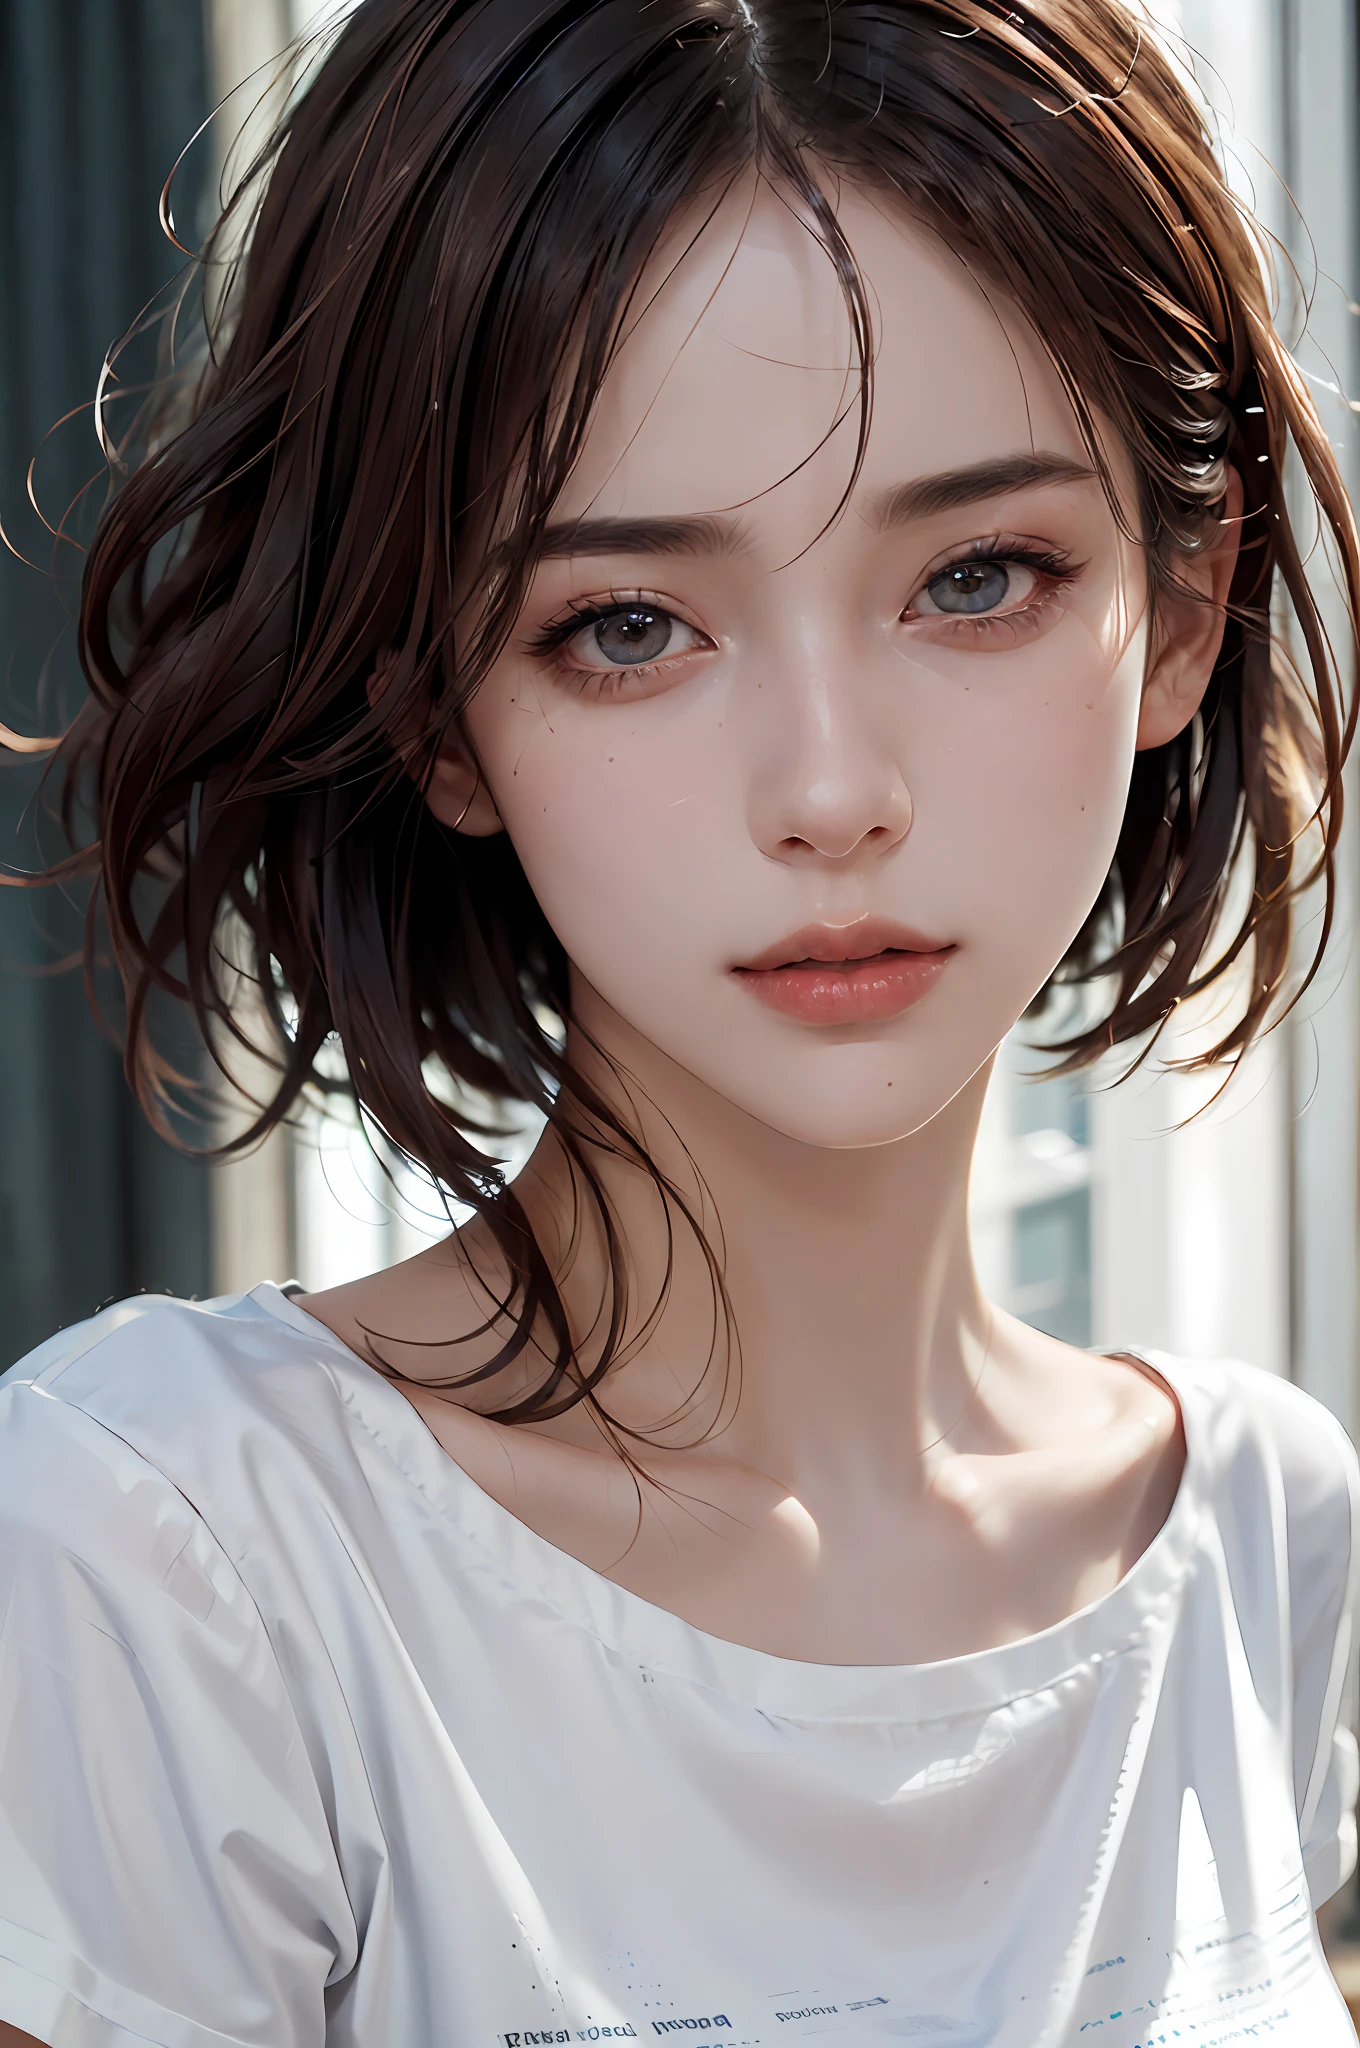 styled(Short Bob Cut Hair、Wavy)、(photoRealstic:1.4)、(hiper realistic:1.4)、(Realistic:1.3)、(Smooth lighting:1.05)、(Improved cinematic lighting quality:0.9)、32 k、1girl in、20 years girl、Realistic lighting、Back lighting、Facial Lights、Ray tracing、(brightened light:1.2)、(Quality improvement:1.4)、(Realistic textured skin of the highest quality:1.4)、fine detailed eyes、detailed faces、Fine quality eye、(Tired, sleepy and satisfied: 0.0)、Face Close-up、tshirts、(Enhances the atmosphere of the body line:1.1)、